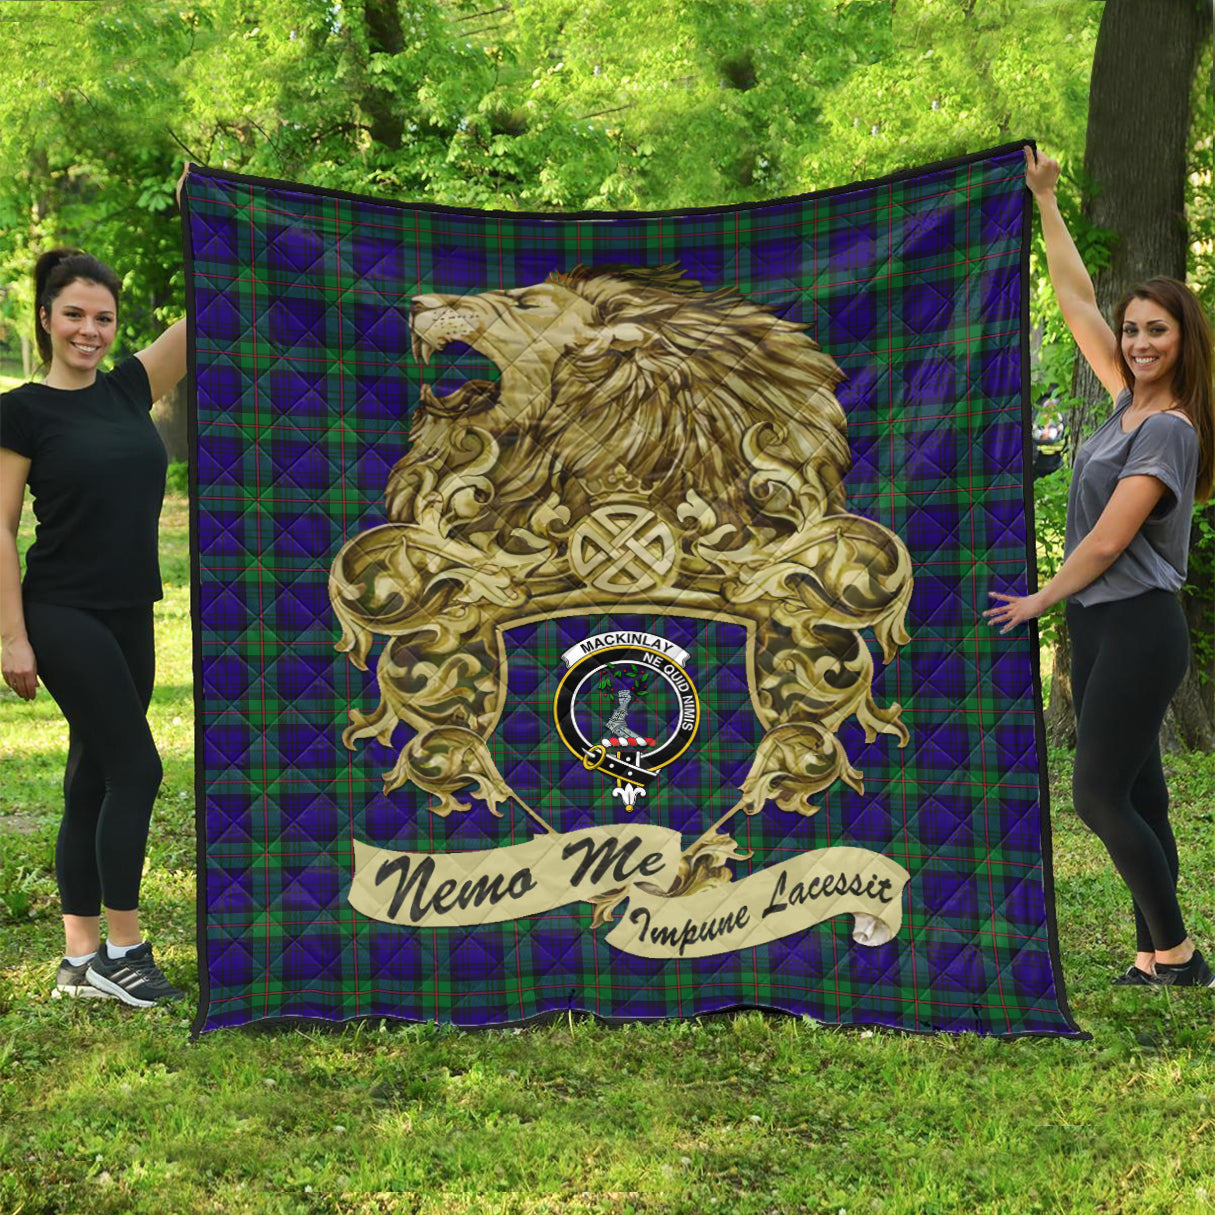 mackinlay-modern-tartan-quilt-with-motto-nemo-me-impune-lacessit-with-vintage-lion-family-crest-tartan-quilt-pattern-scottish-tartan-plaid-quilt-vintage-style